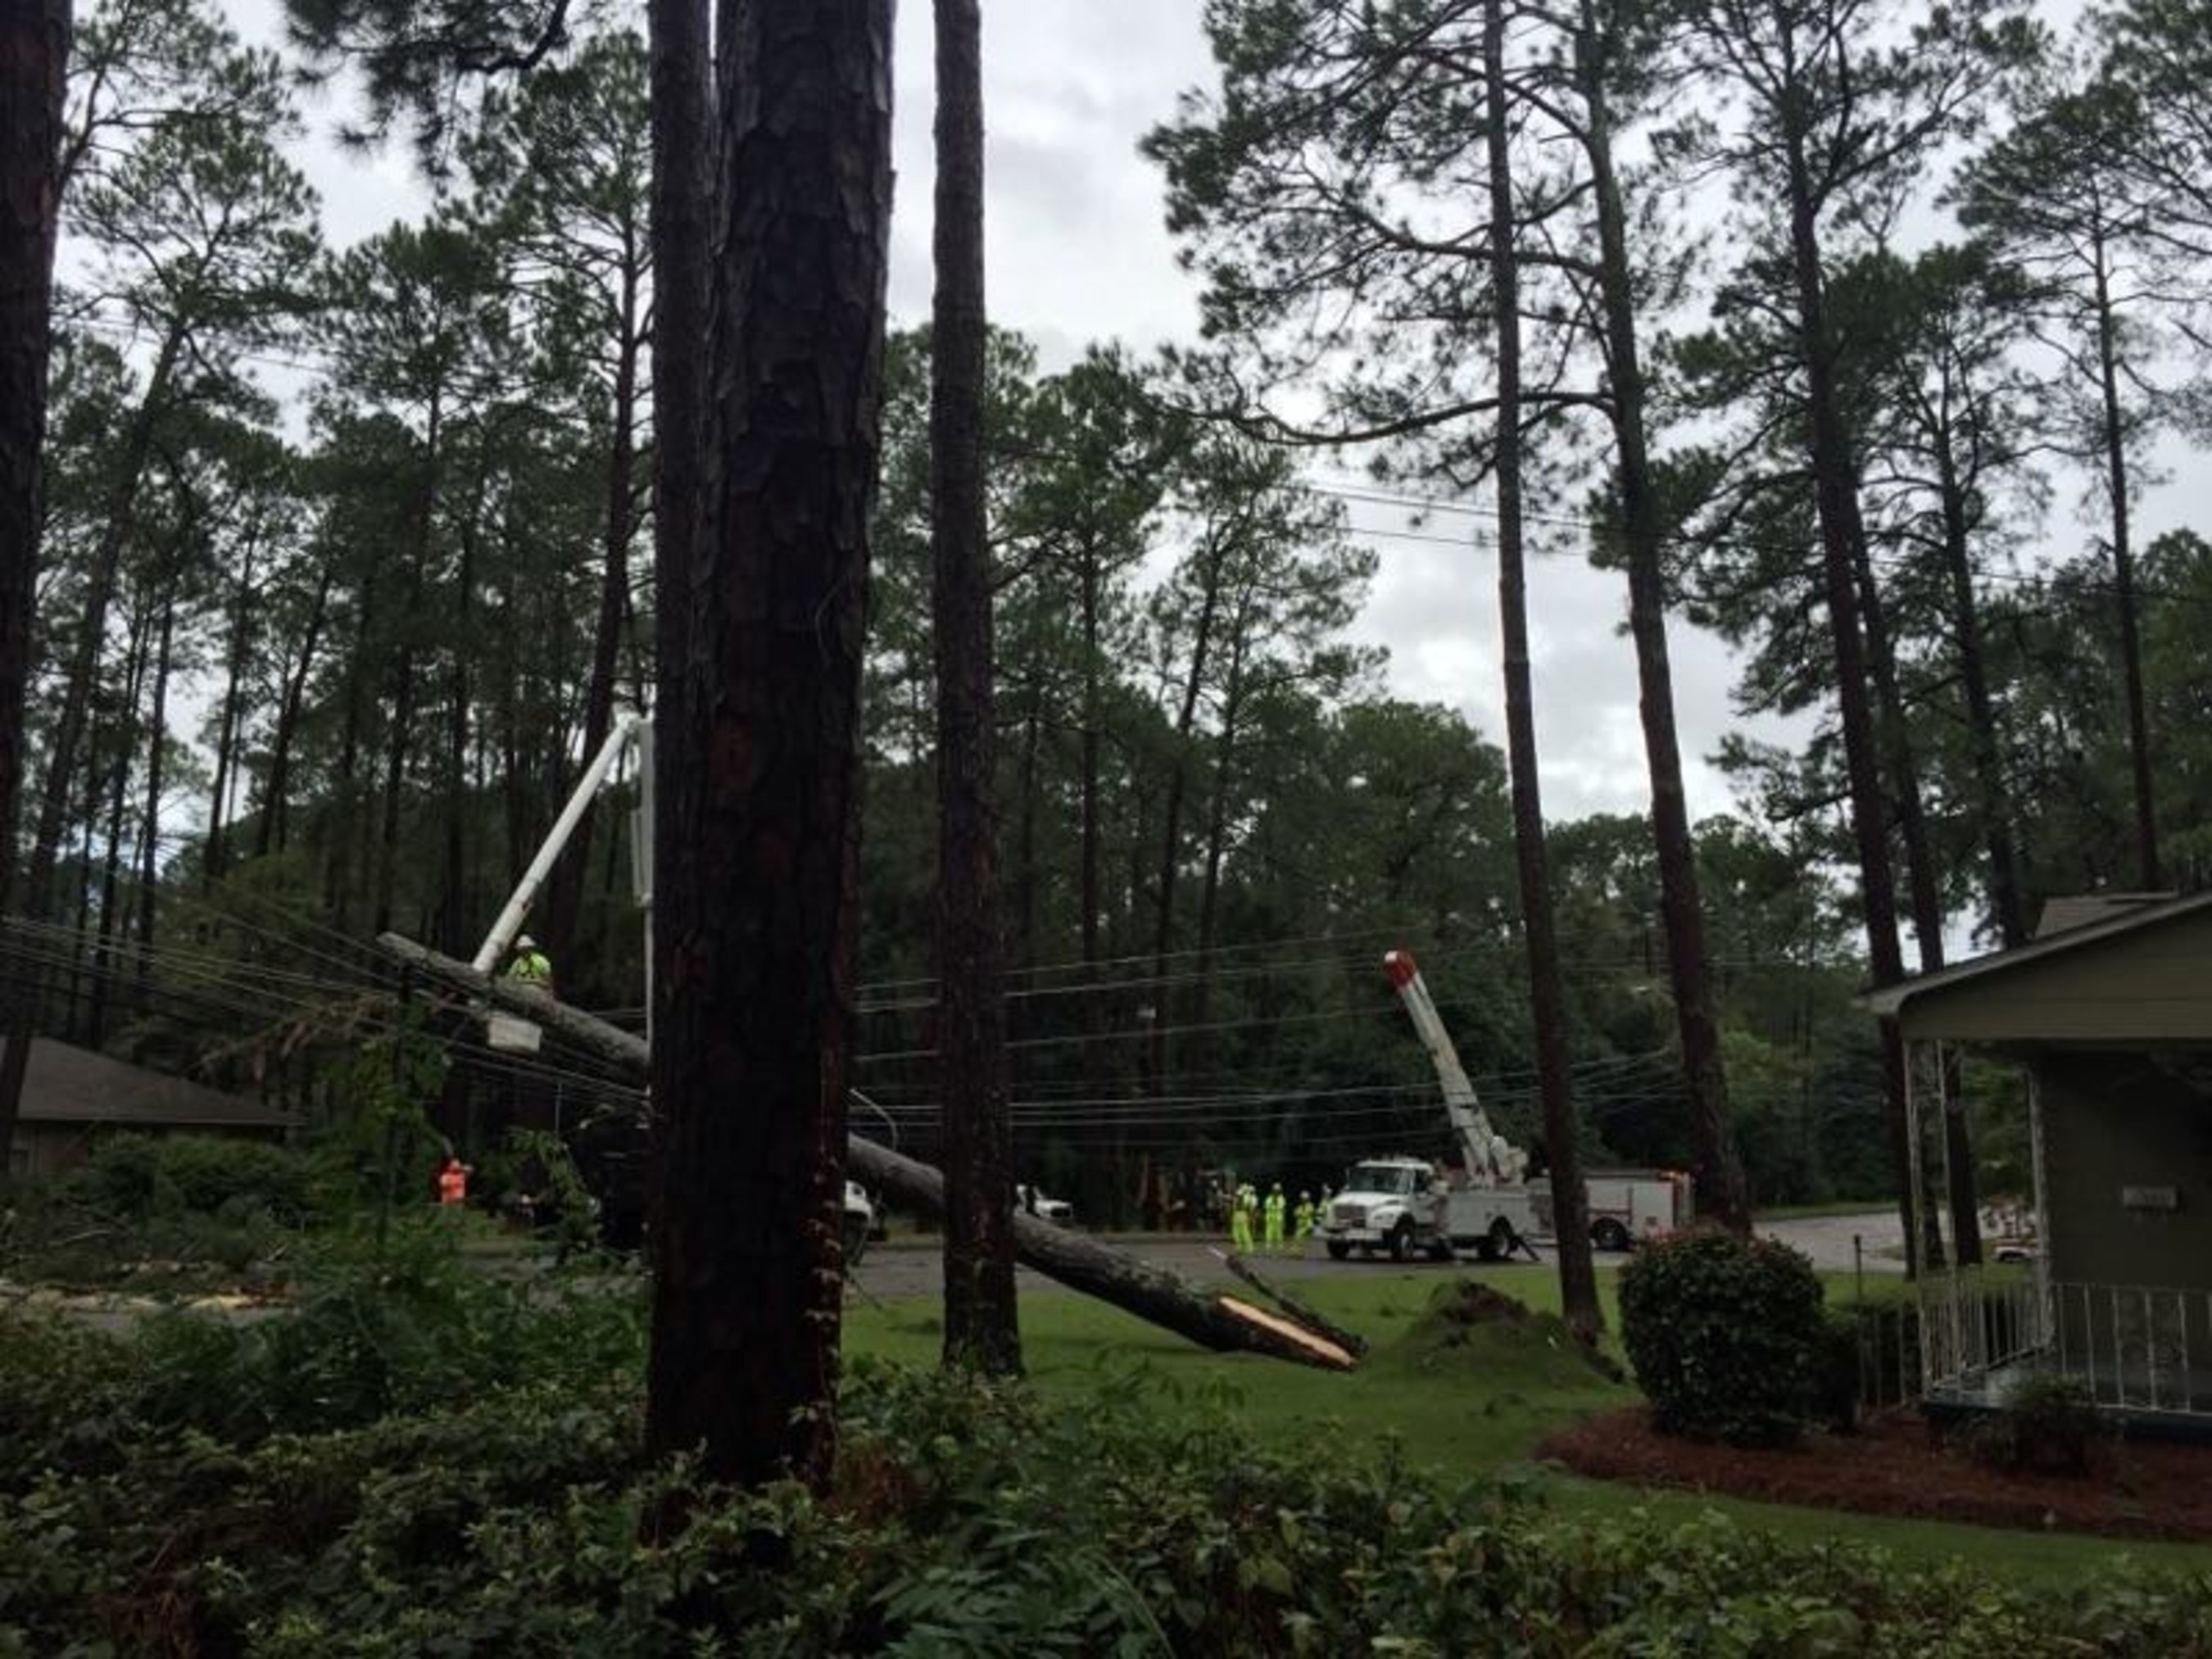 Large trees caused extensive damage in South and Coastal Georgia during Tropical Storm Hermine. Georgia Power crews work to restore service to thousands and quickly and safely as possible.